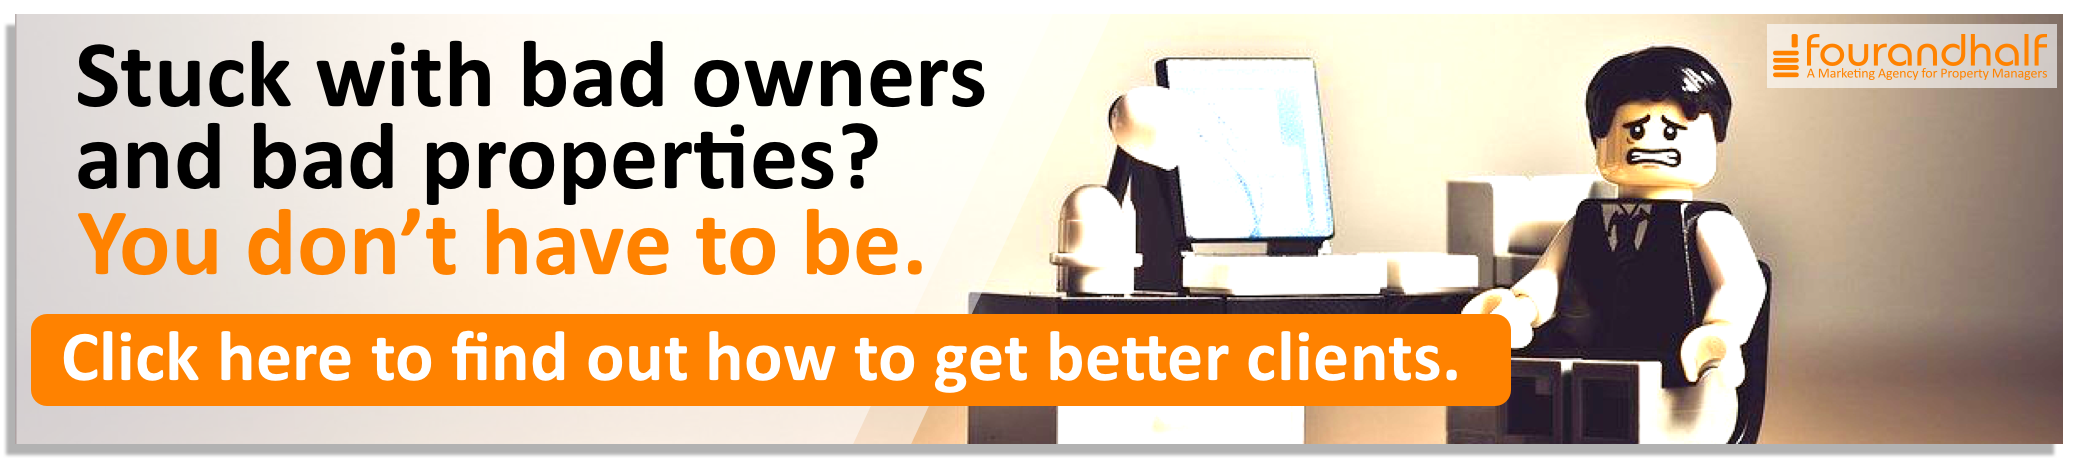 Find out how to get better clients with Fourandhalf Marketing